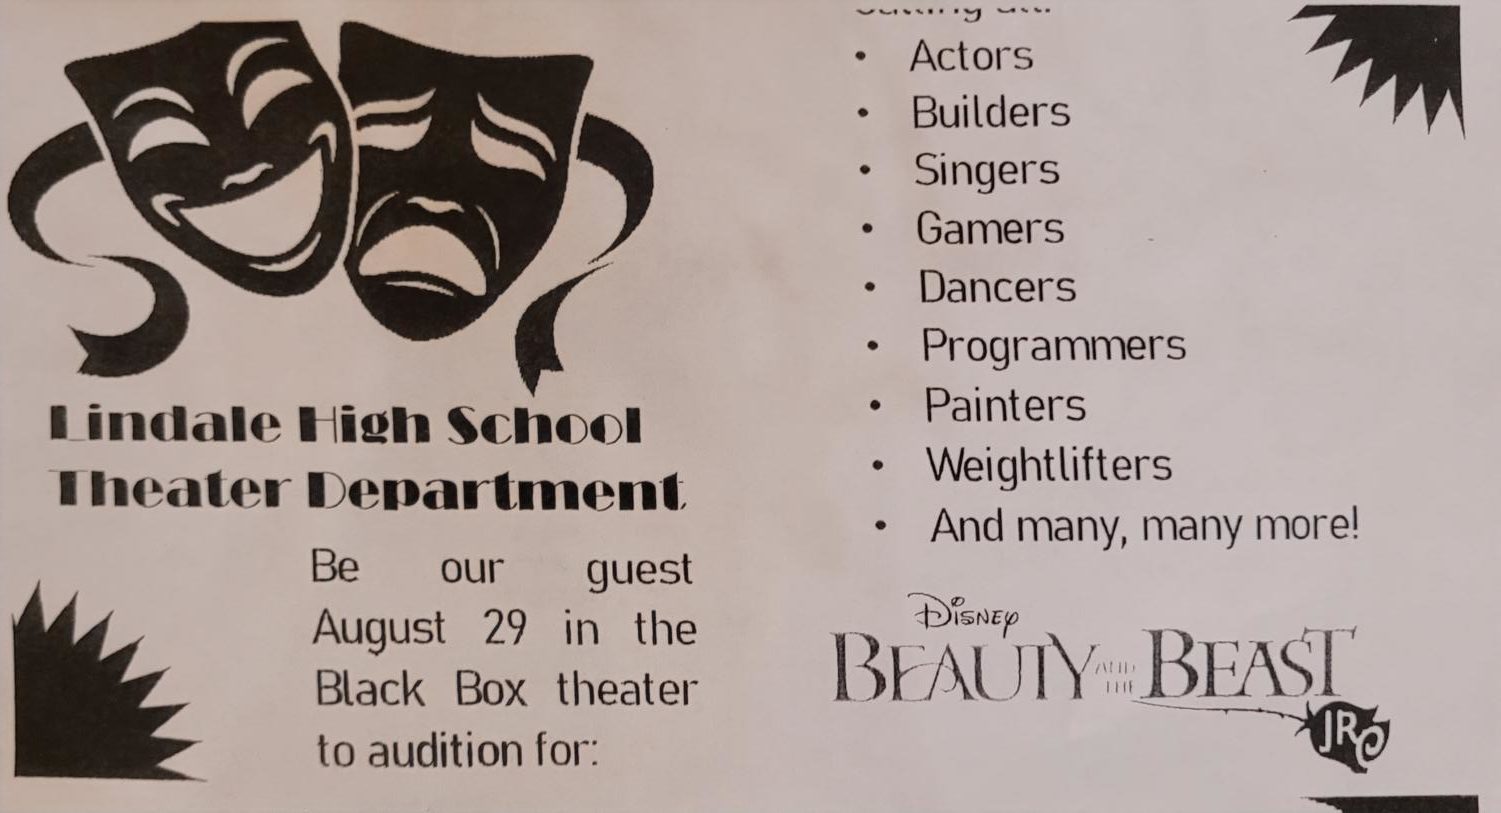 Audition flyers handed out by theater students. All high school students are invited to try out in the Black Box.